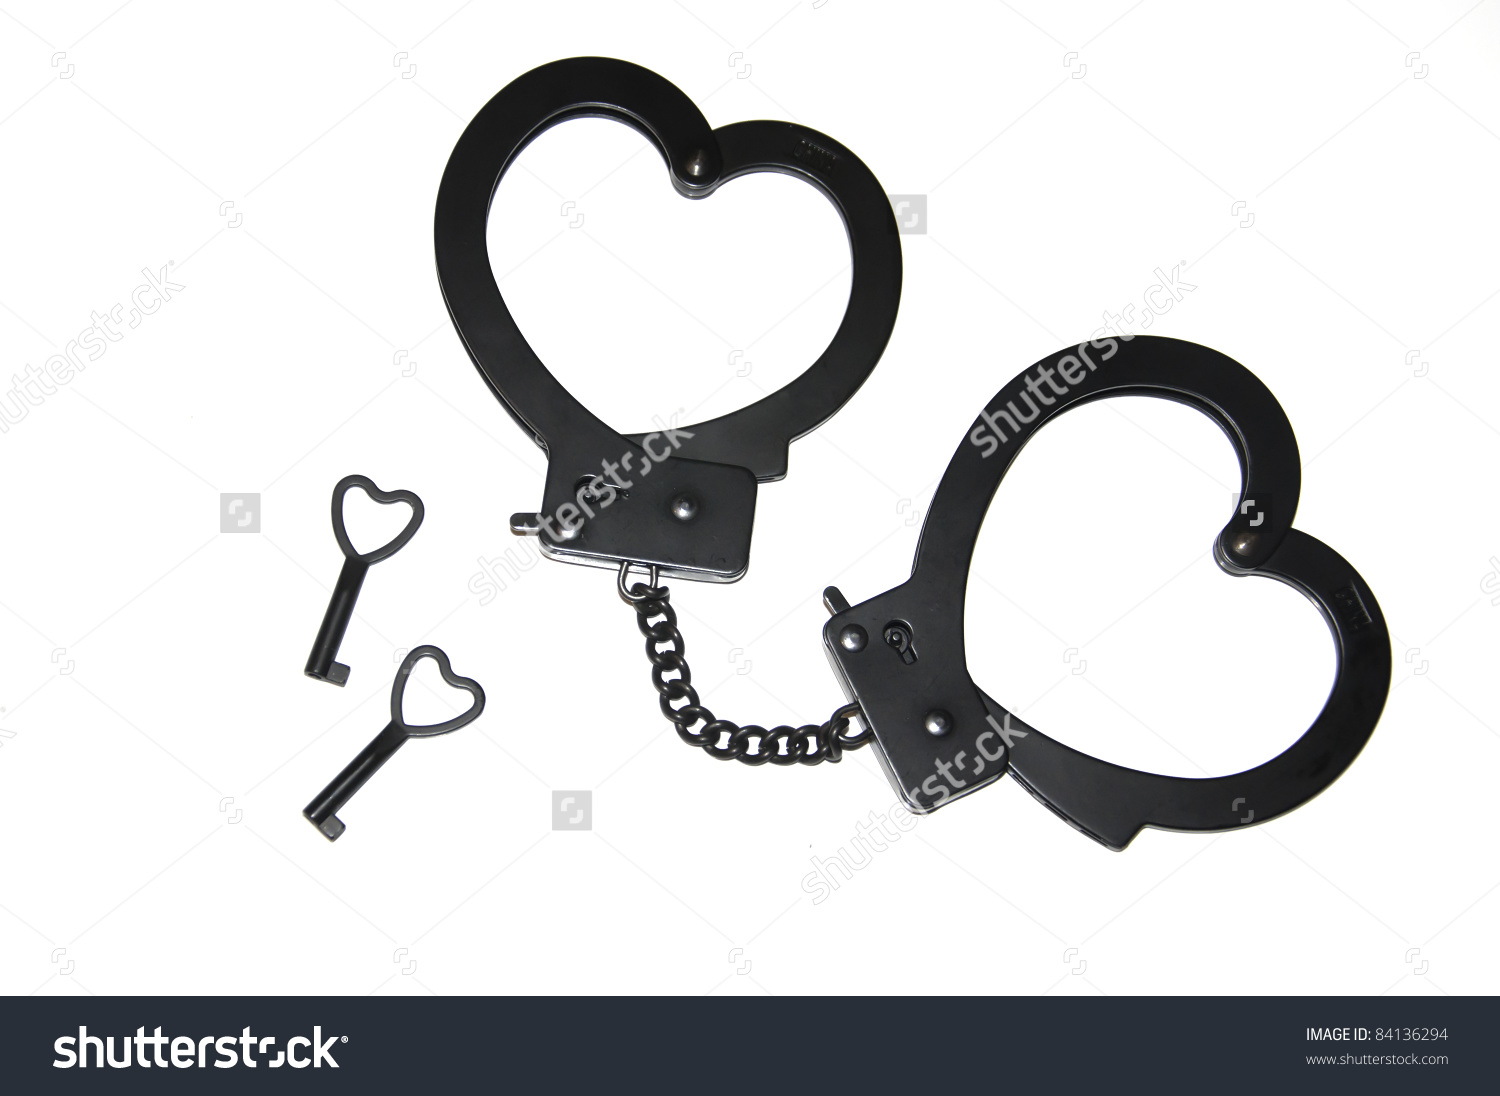 Handcuffs and key clipart 